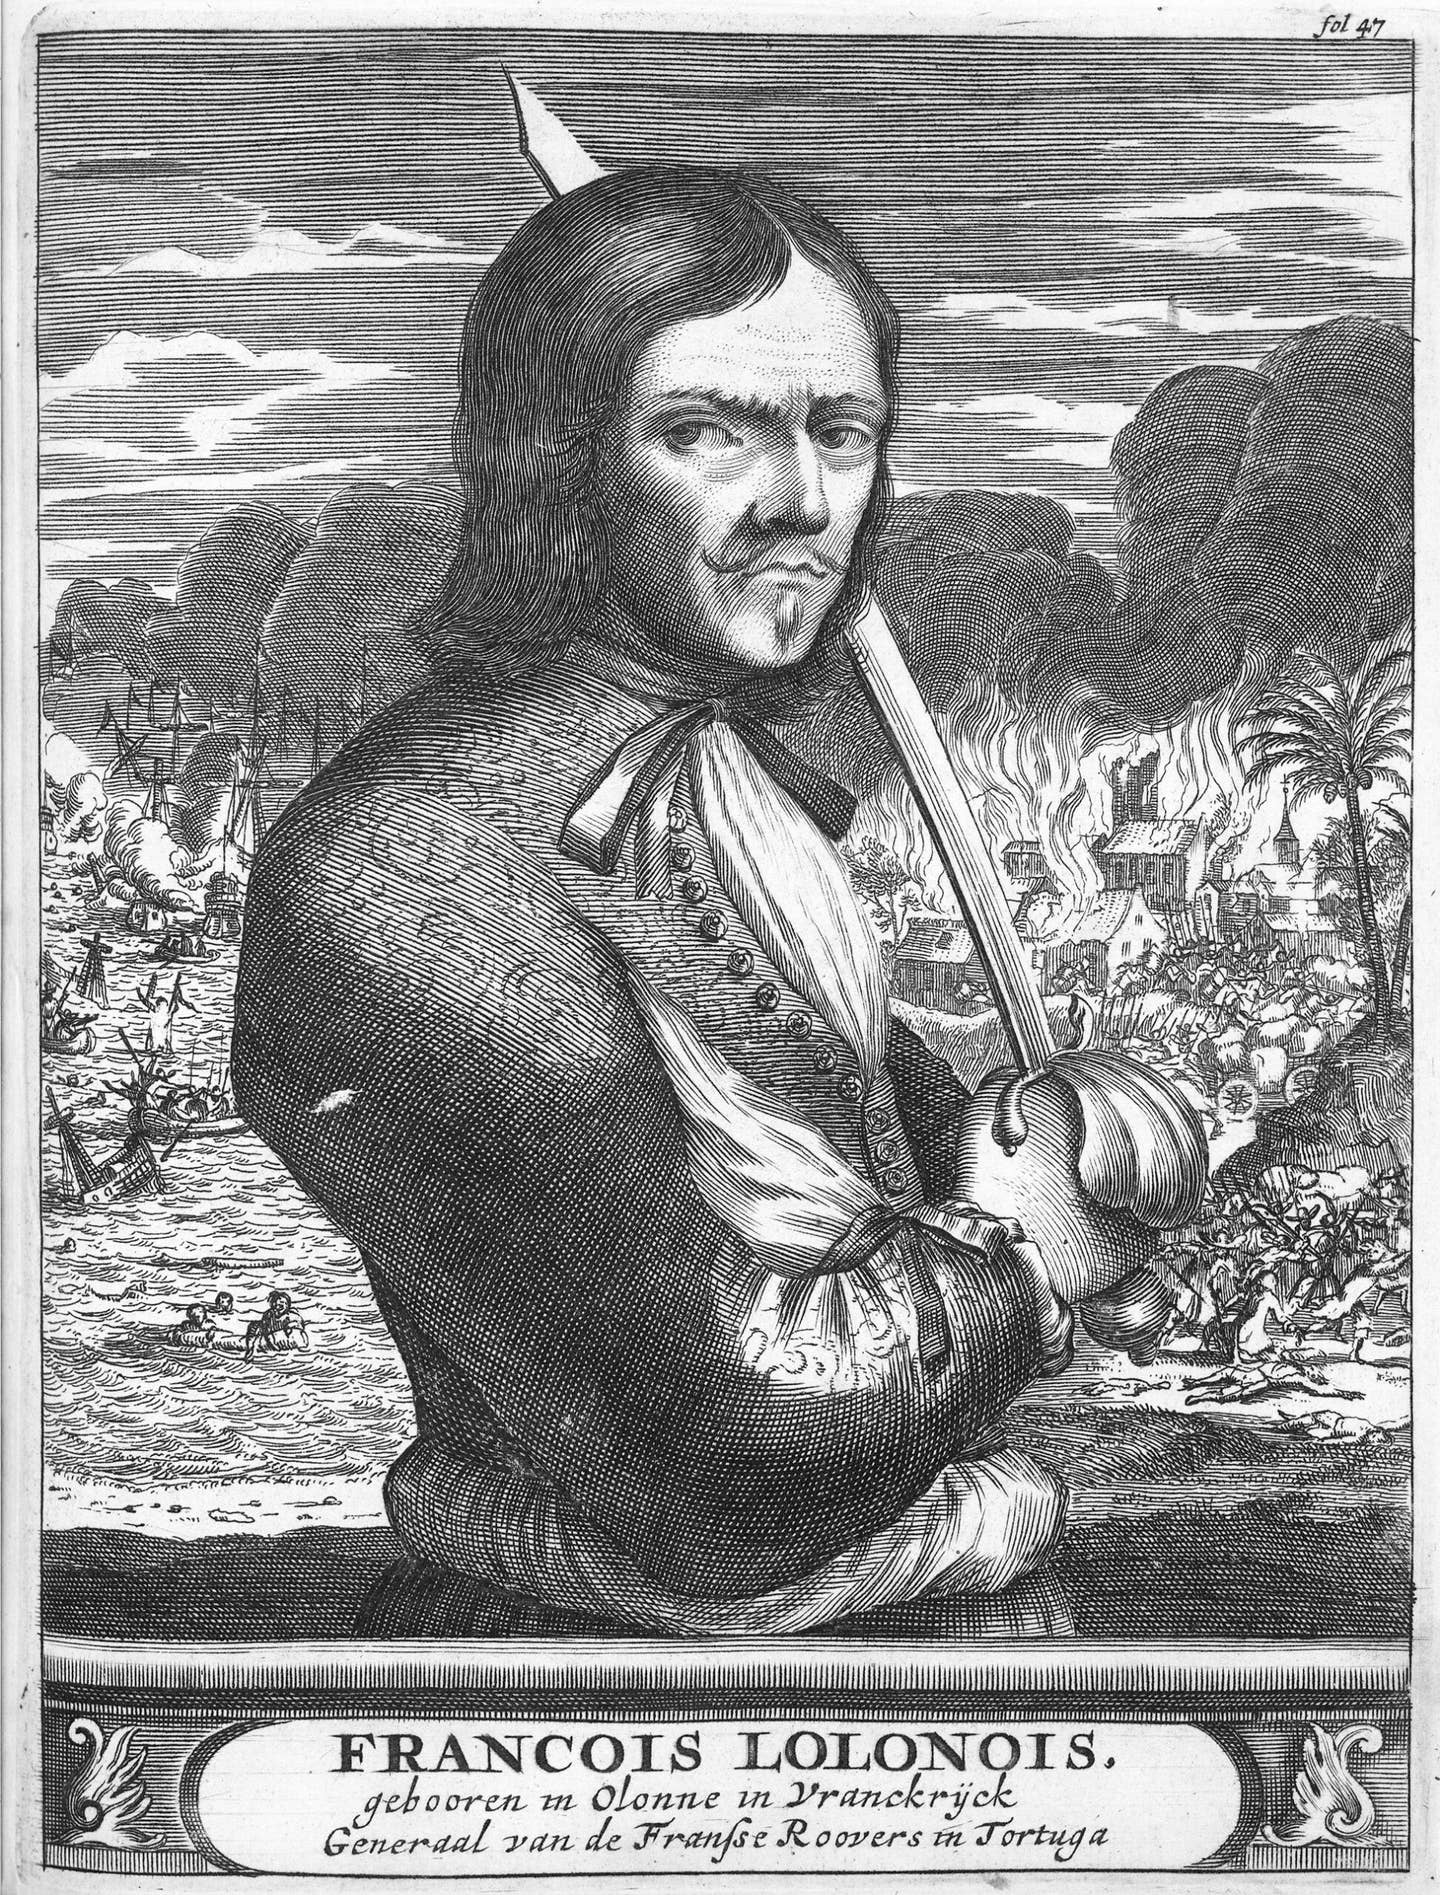 François l’Olonnais, a notorious French pirate who was active in the Caribbean during the 1660s. As a buccaneer, he targeted shipping from the Spanish West Indies and the Spanish Main. <em>Public Domain</em>